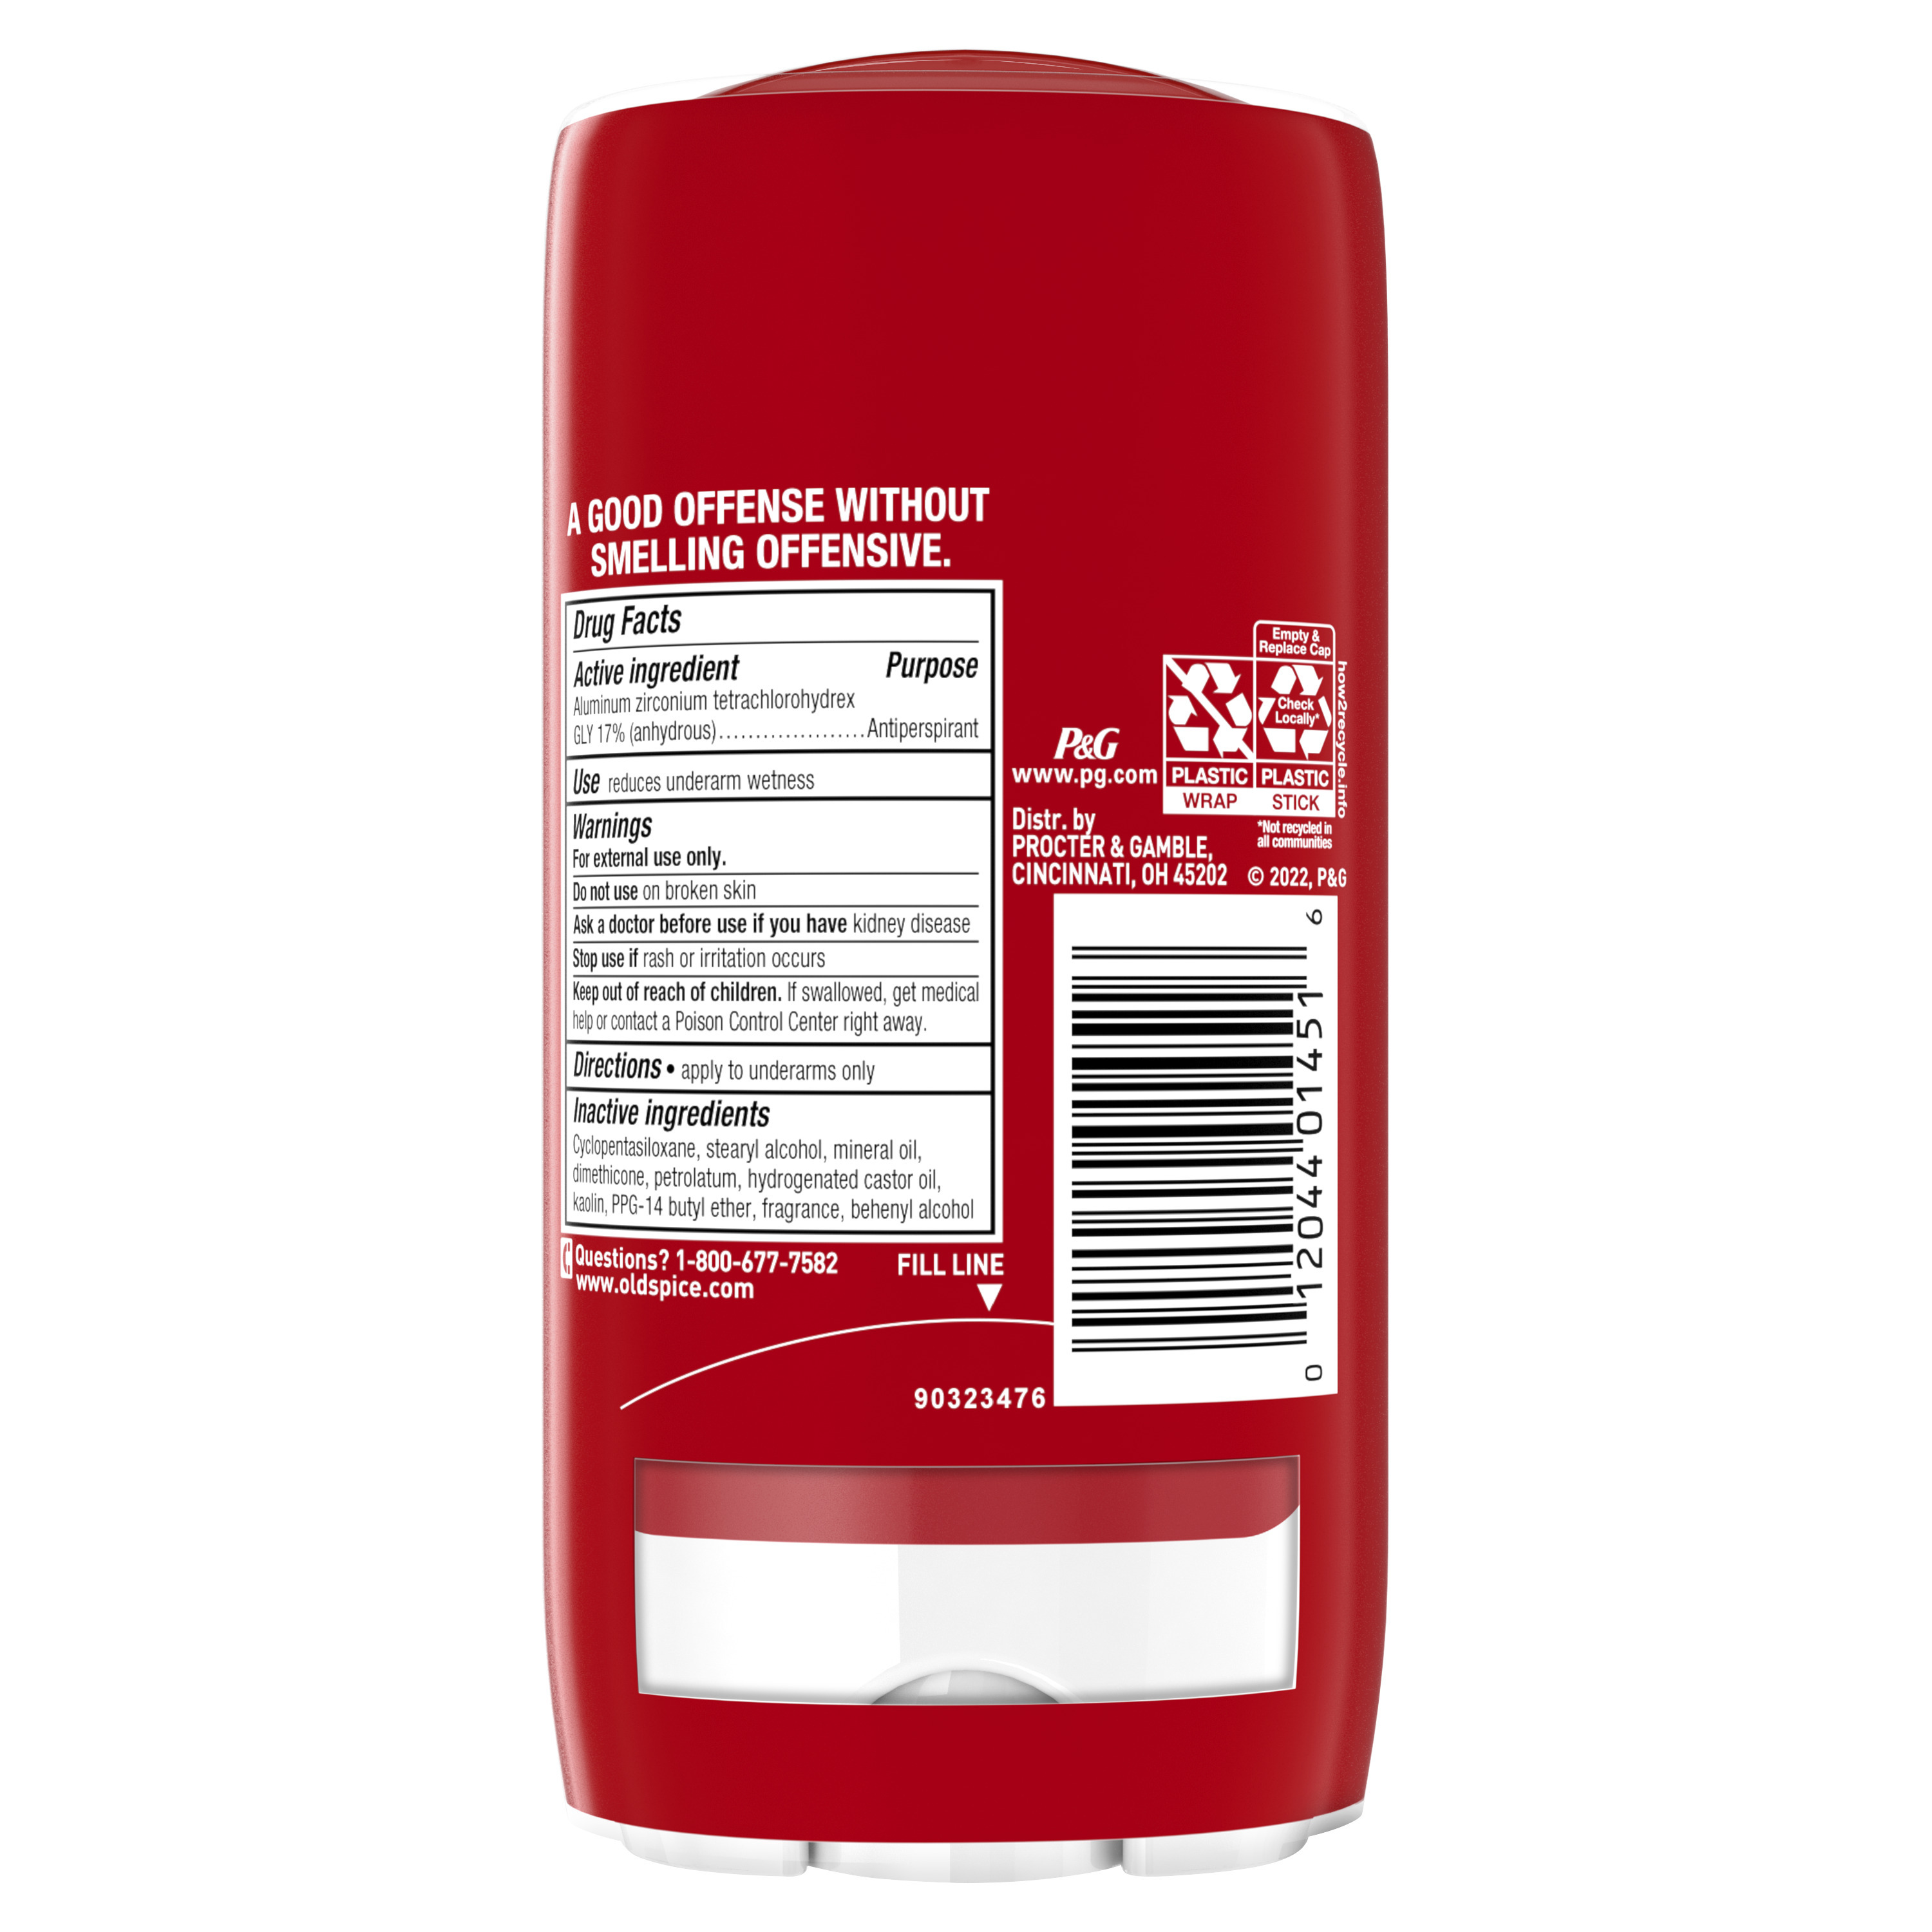 Old Spice High Endurance Antiperspirant Deodorant for Men, Pure Sport Scent, 3.0 oz Twin Pack - image 5 of 5